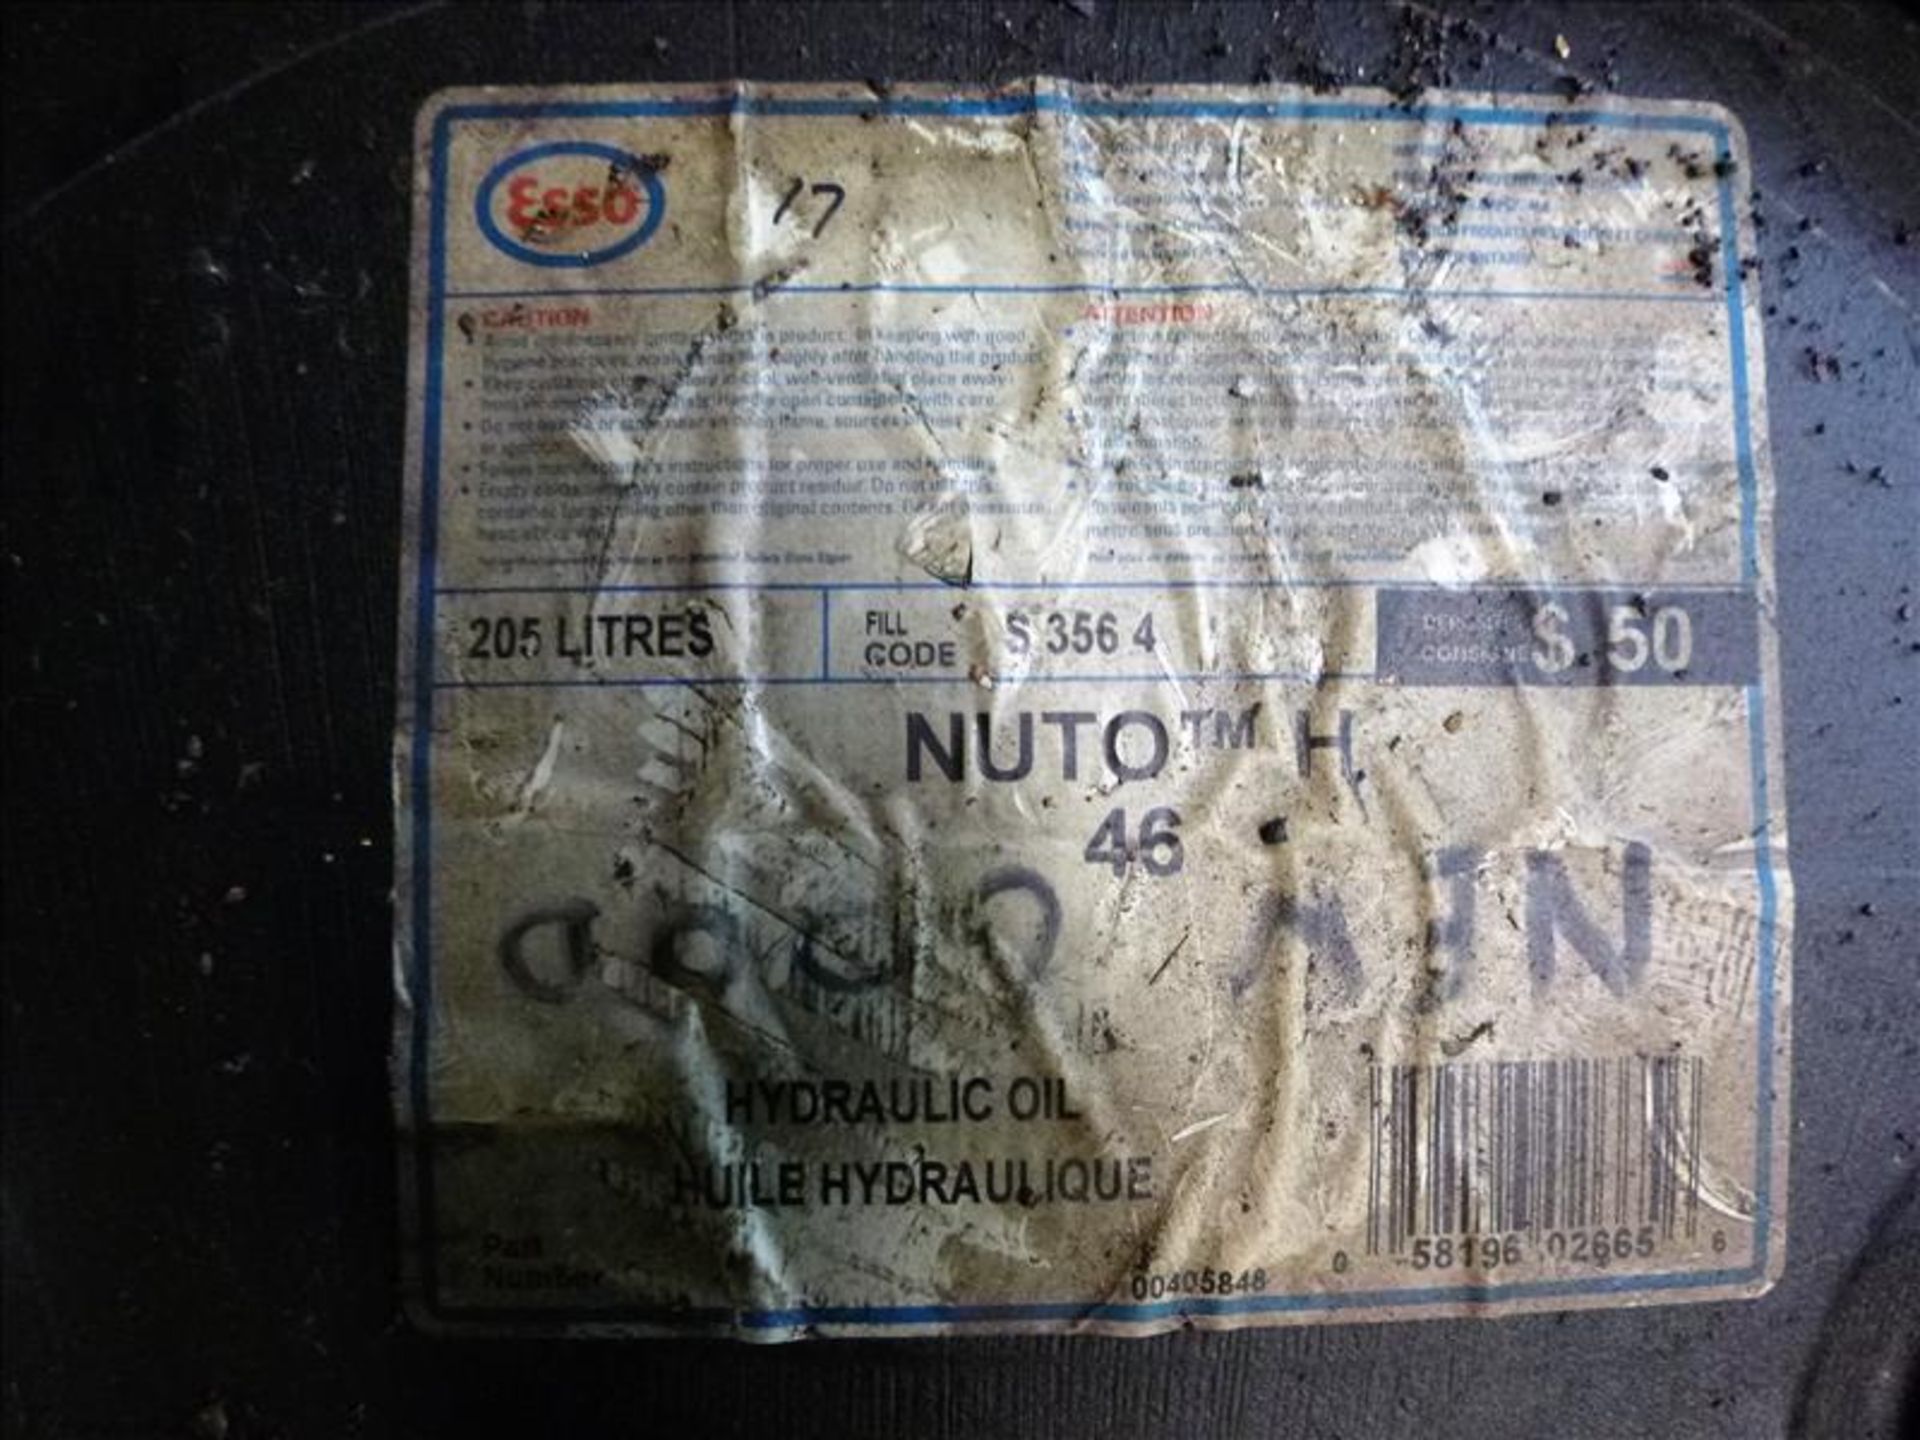 (2 drums) Esso NUTO H 46 Hydraulic Oil (marked as NEW/GOOD. Open drums) - Image 2 of 2